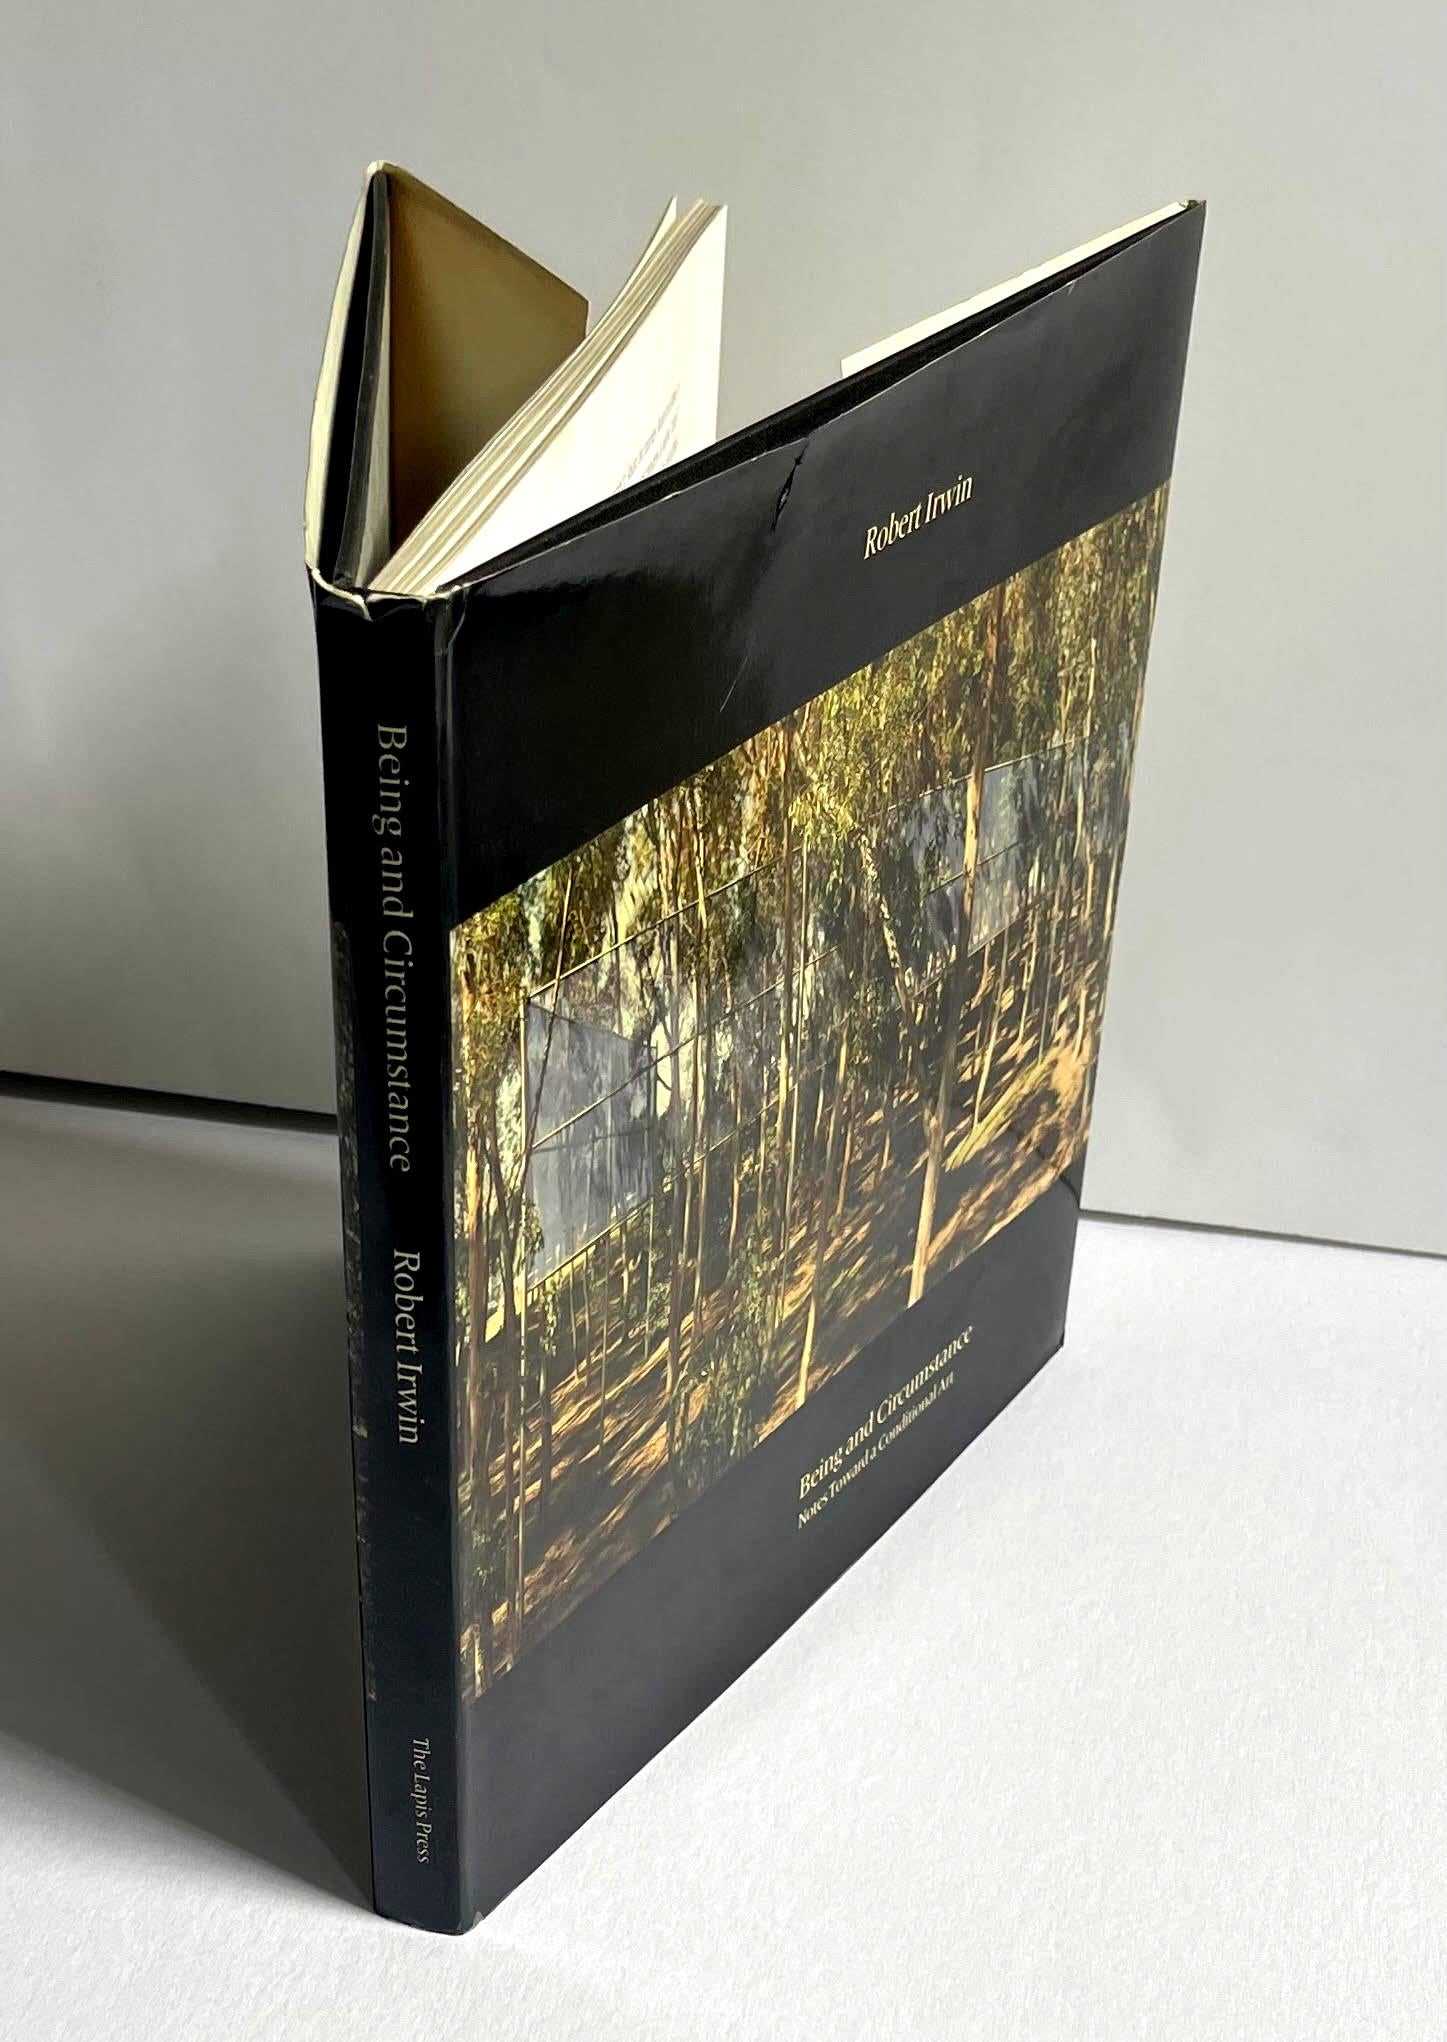 Robert Irwin
Being and Circumstance Notes Toward a Conditional Art, 1985
Hardback monograph with dust jacket  (hand signed and dated 2015 by Robert Irwin)
Boldly signed and dated May 30 2015 by Robert Irwin on the title page
9 × 9 3/4 × 3/4